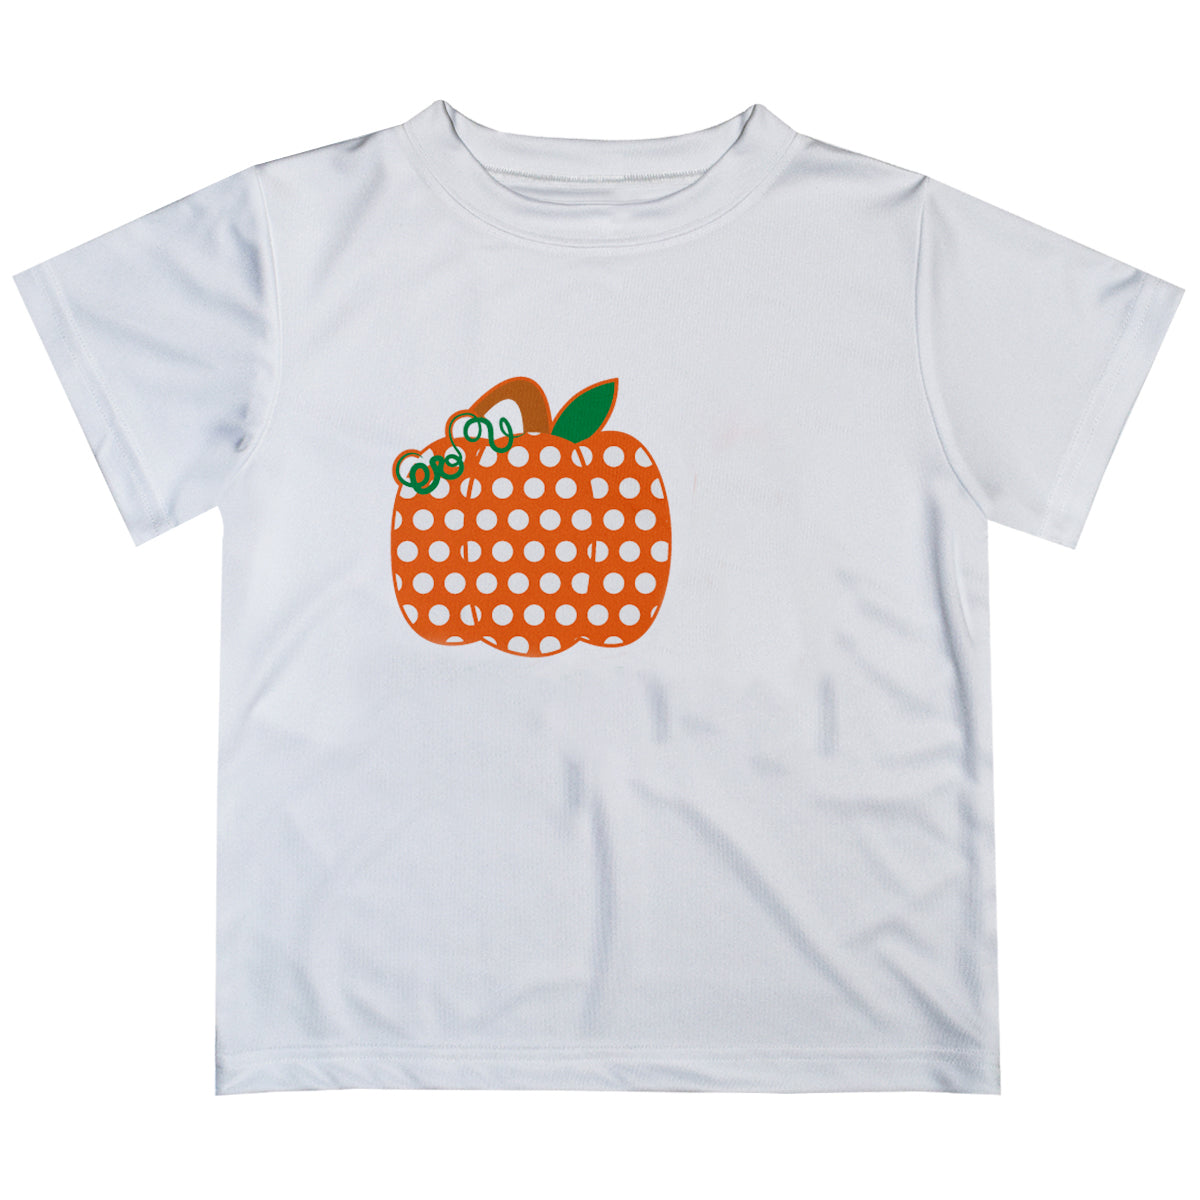 Boys white and orange pumpkin tee shirt with name and initial - Wimziy&Co.